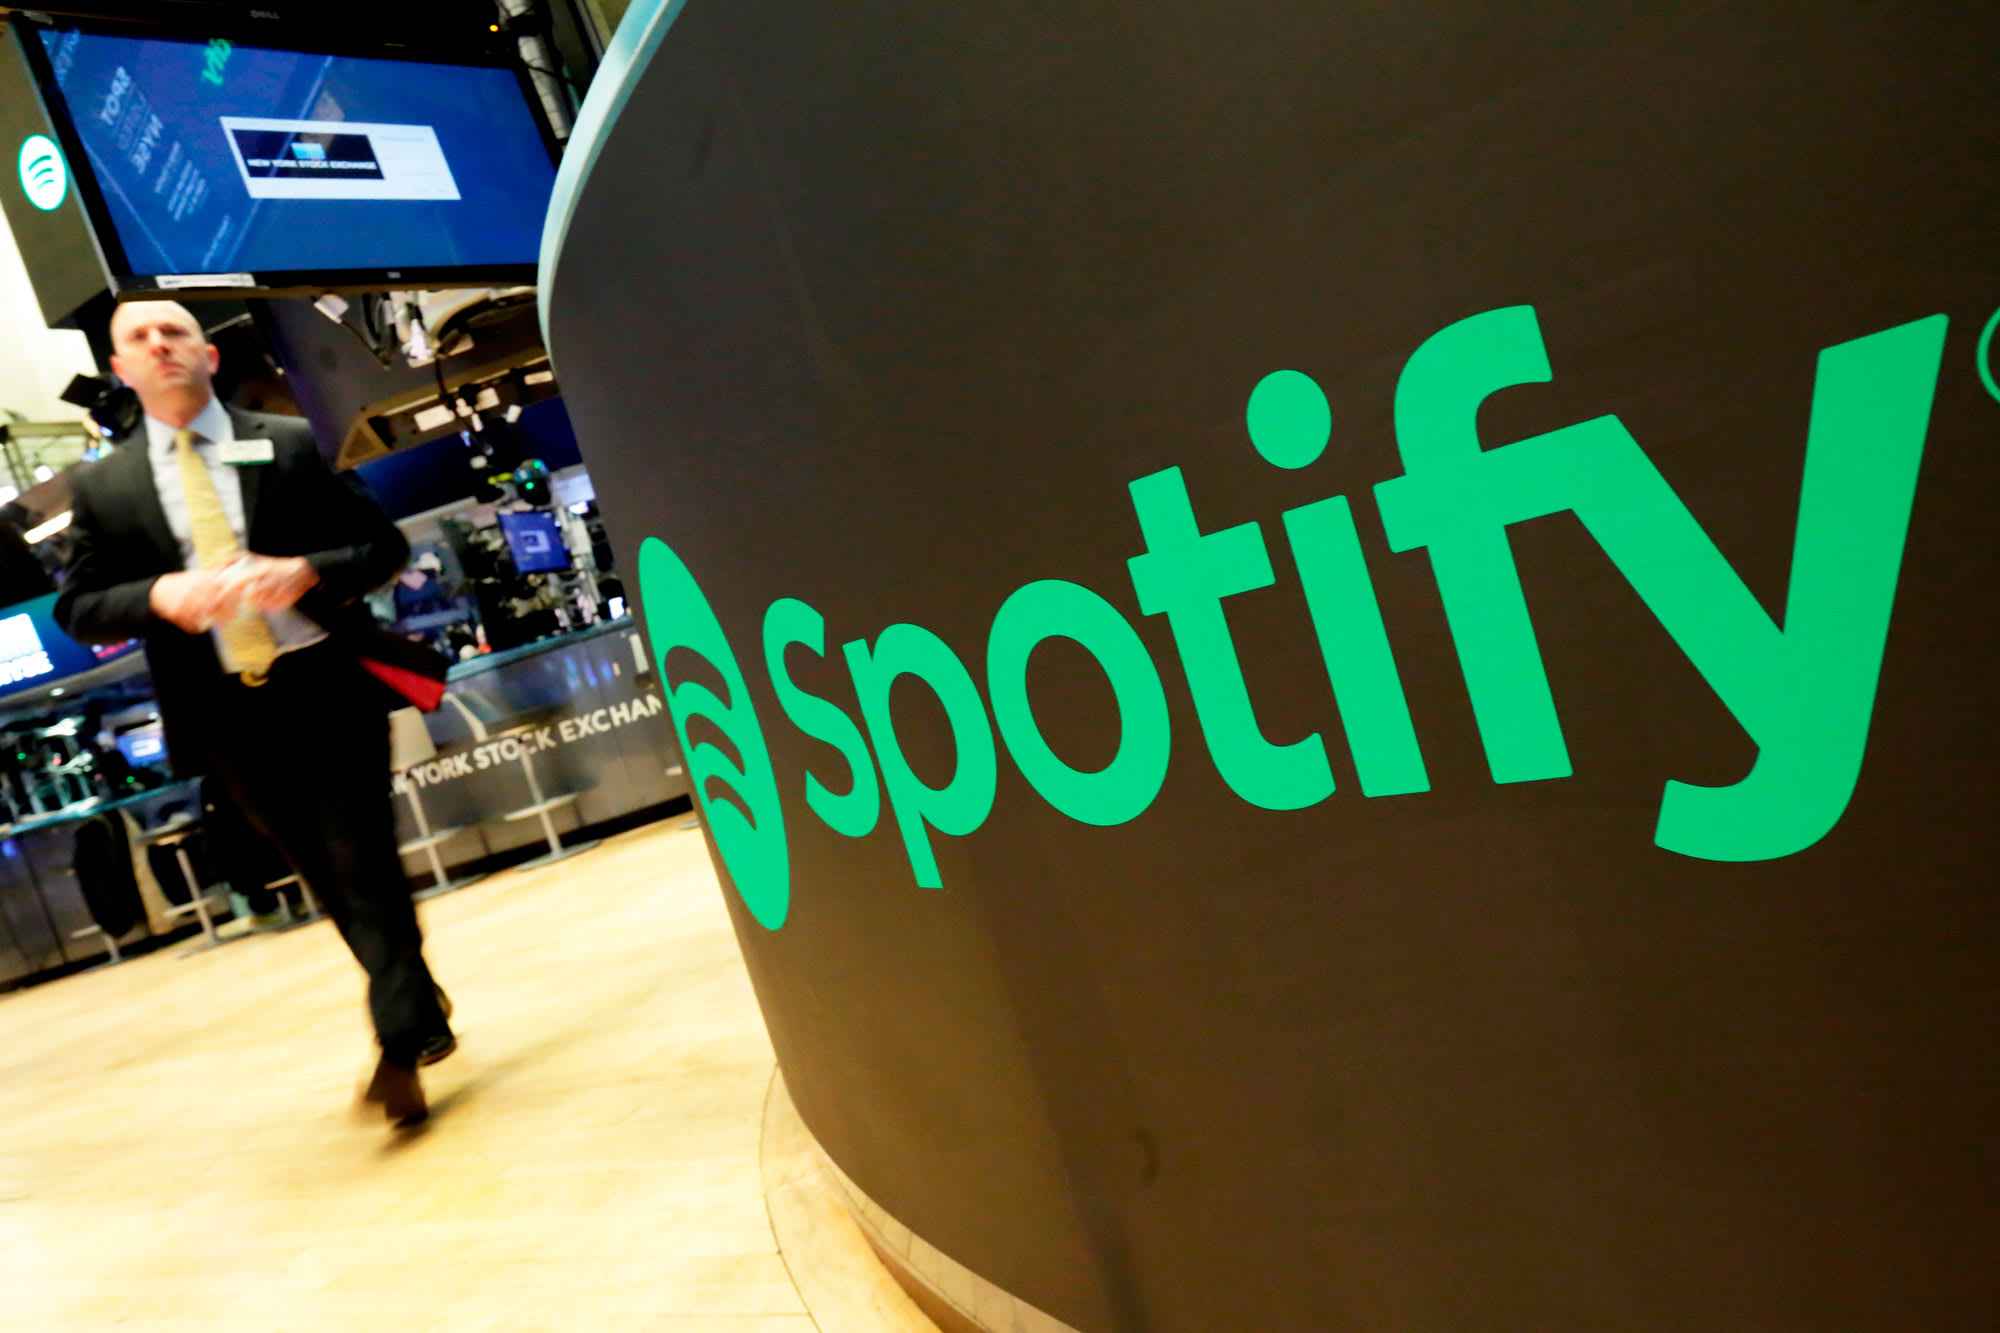 US court asks Spotify for more information about prosecution against Apple